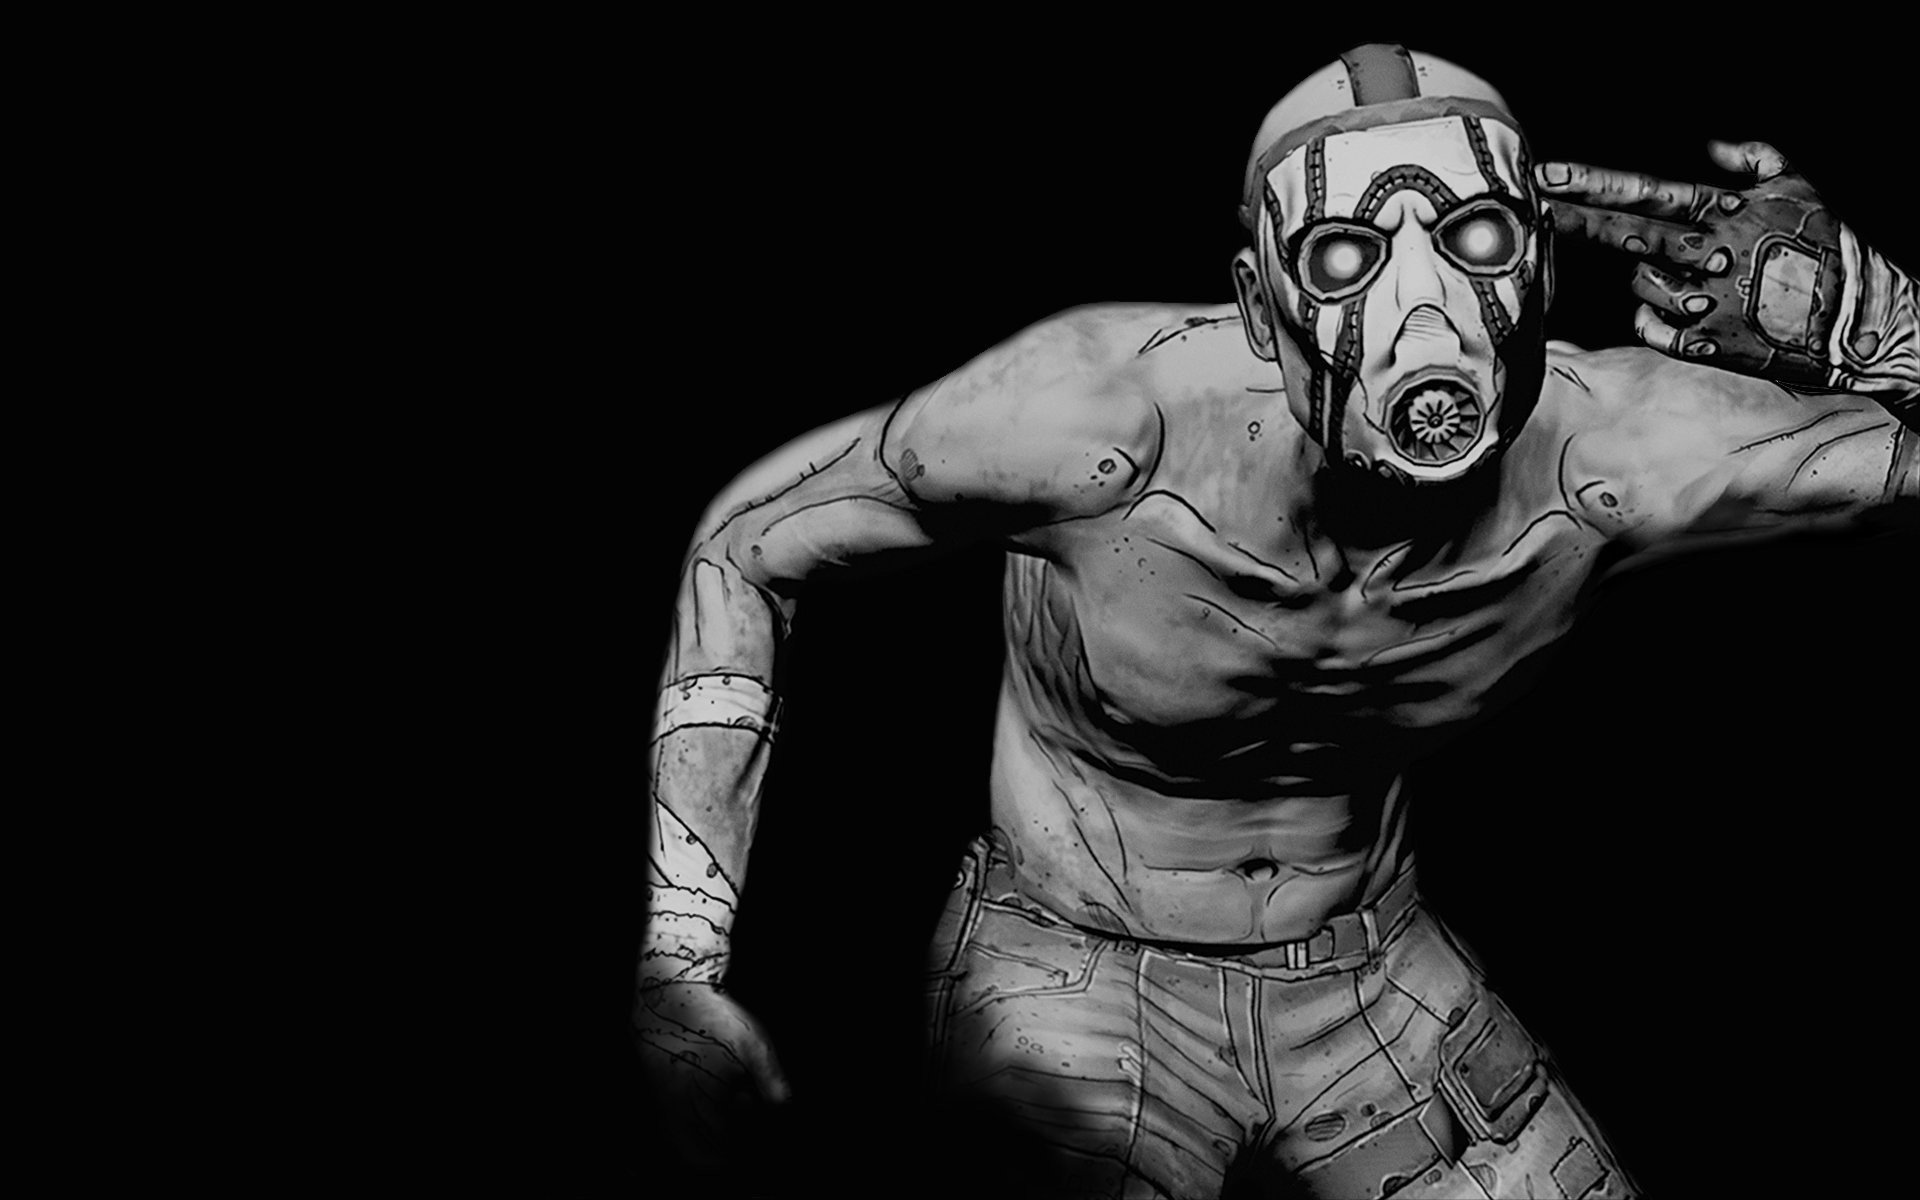 tales from the borderlands wallpaper,personal protective equipment,muscle,costume,black and white,mask